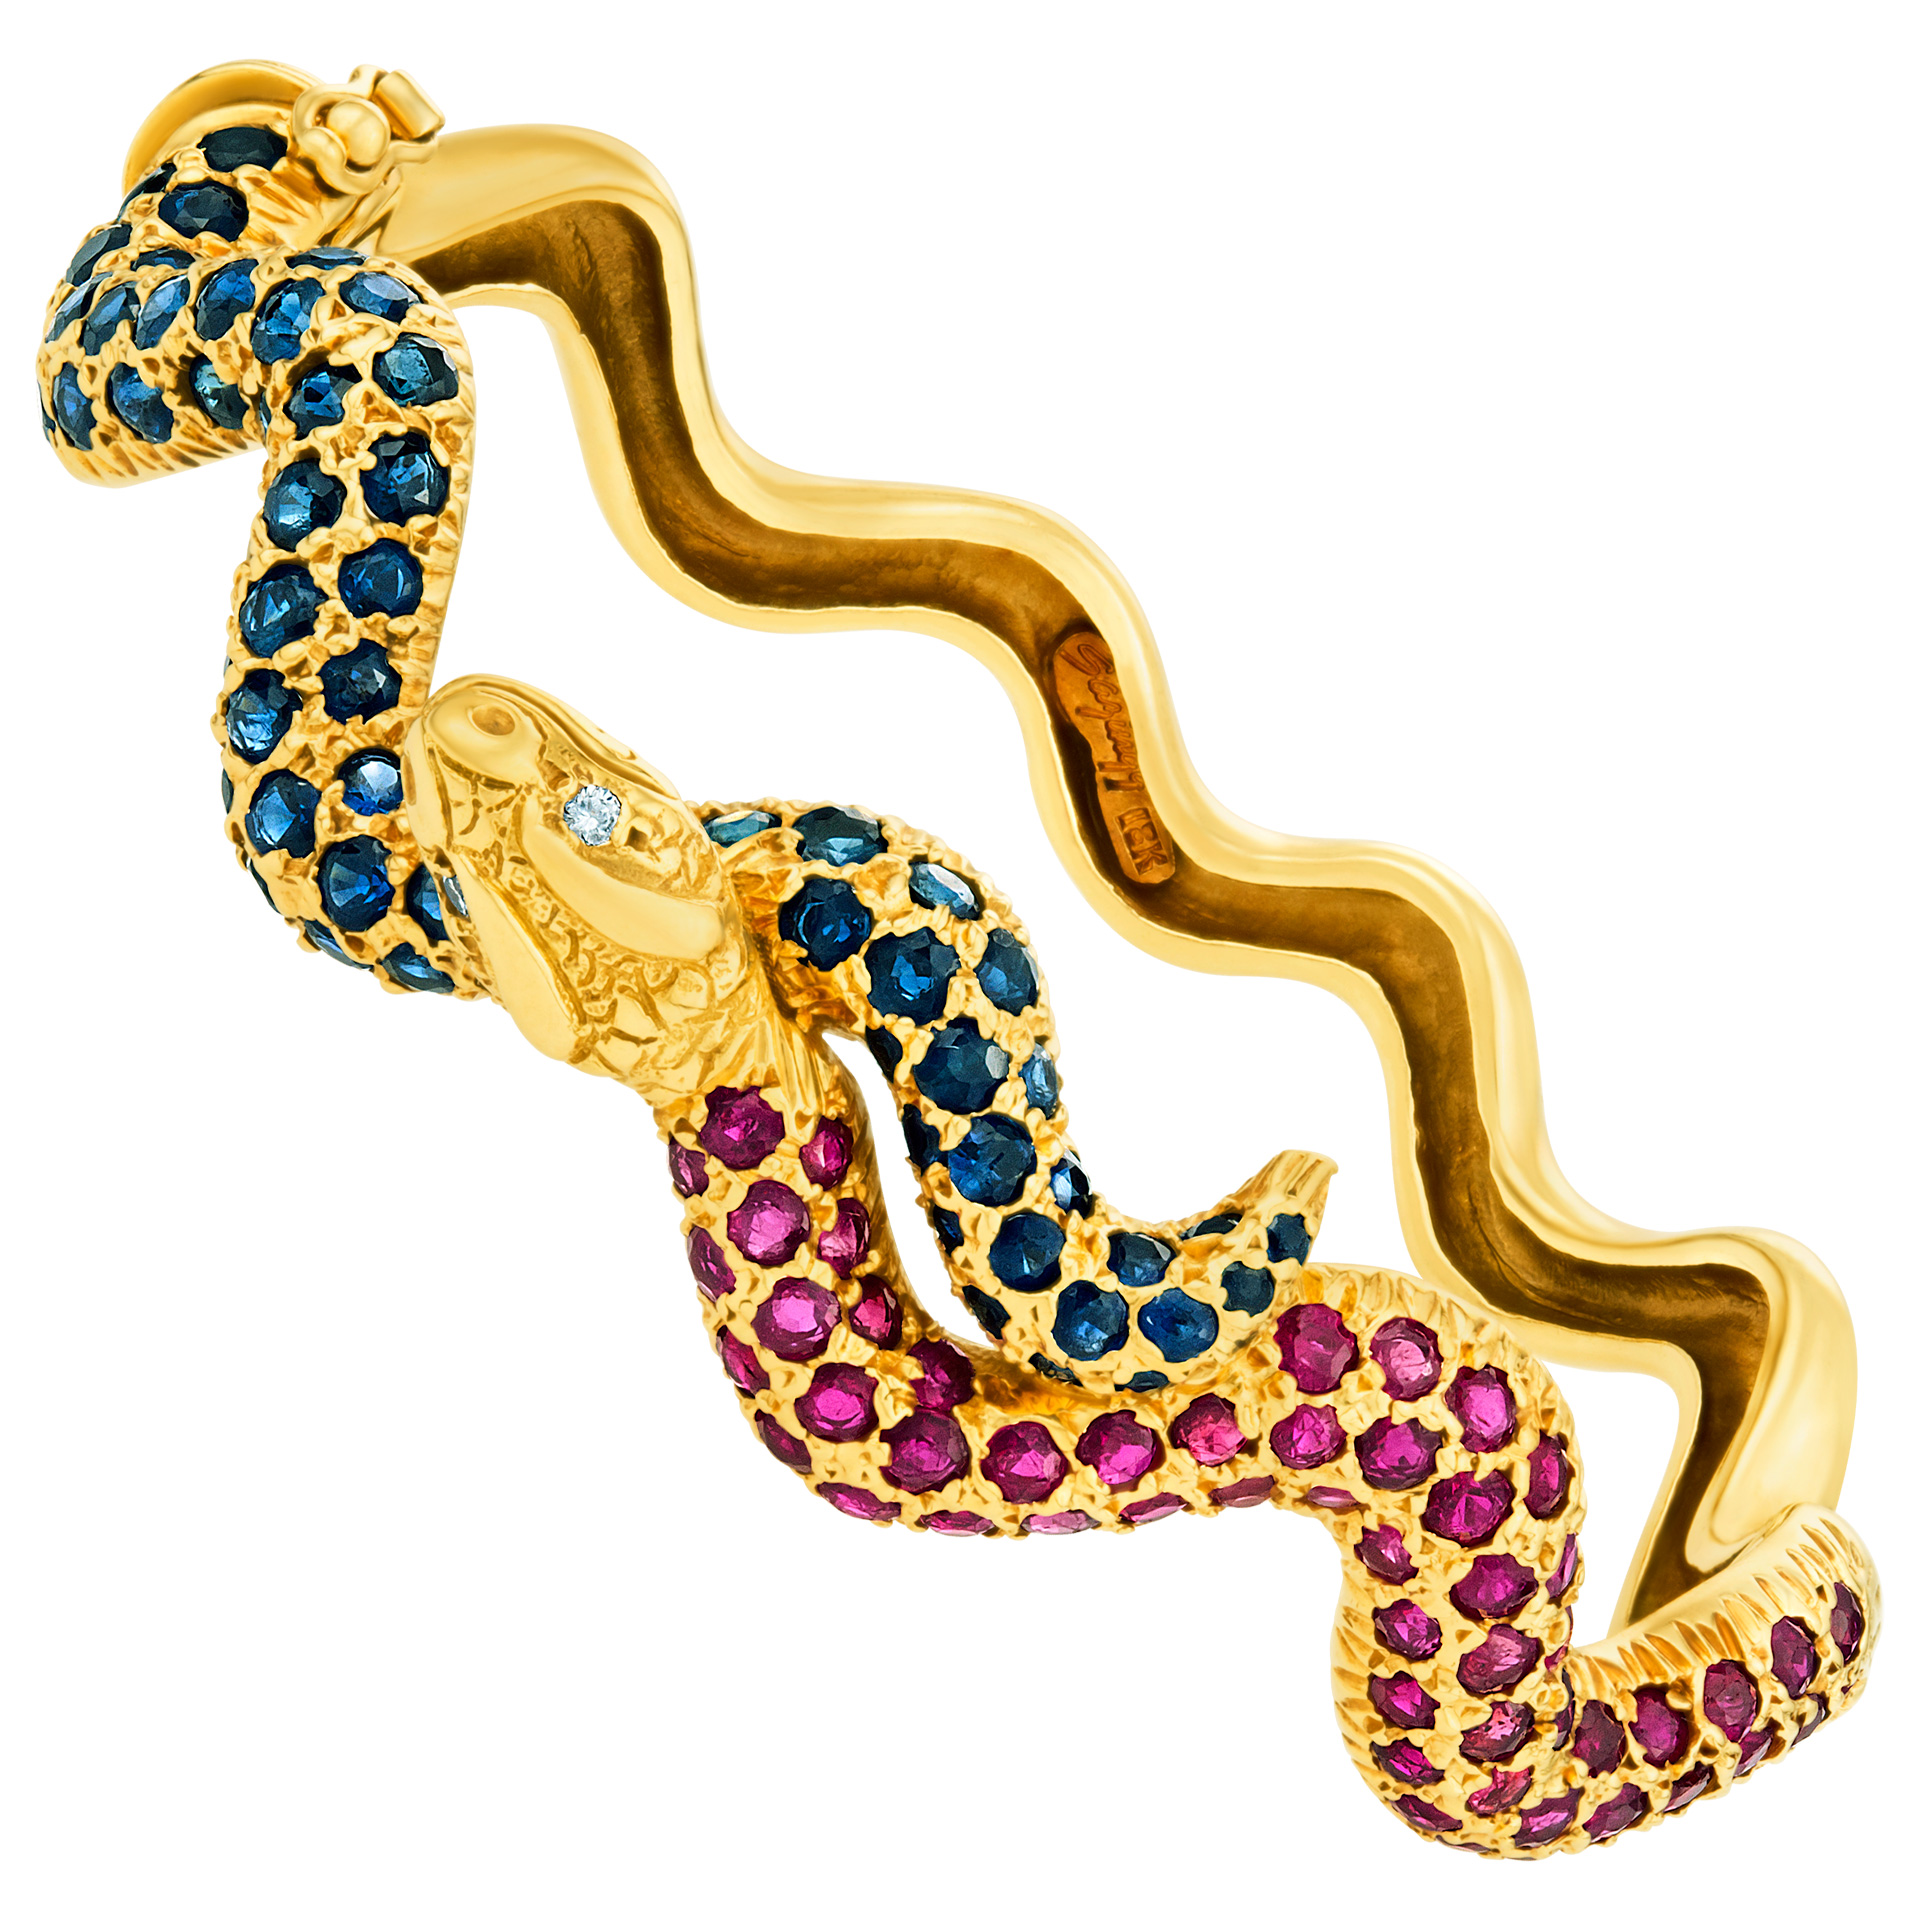 Sazingg 18k snake swirl bangle with app. 3 carats in blue sapphires and rubbies